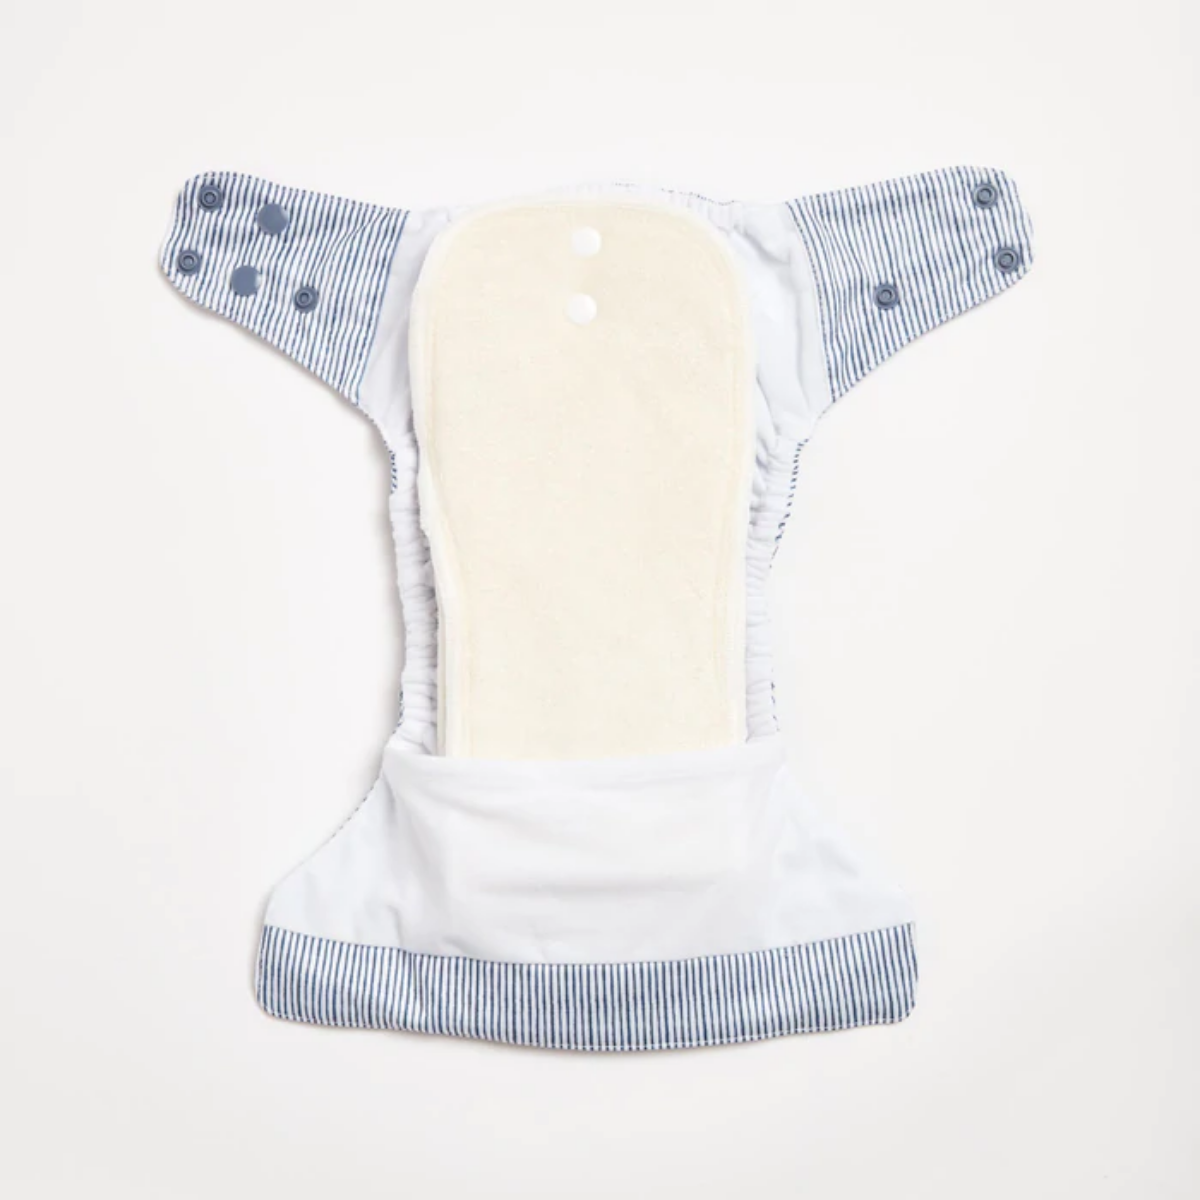 An open Indigo Pinstripe 2.0 Modern Cloth Nappy by EcoNaps on a white surface.